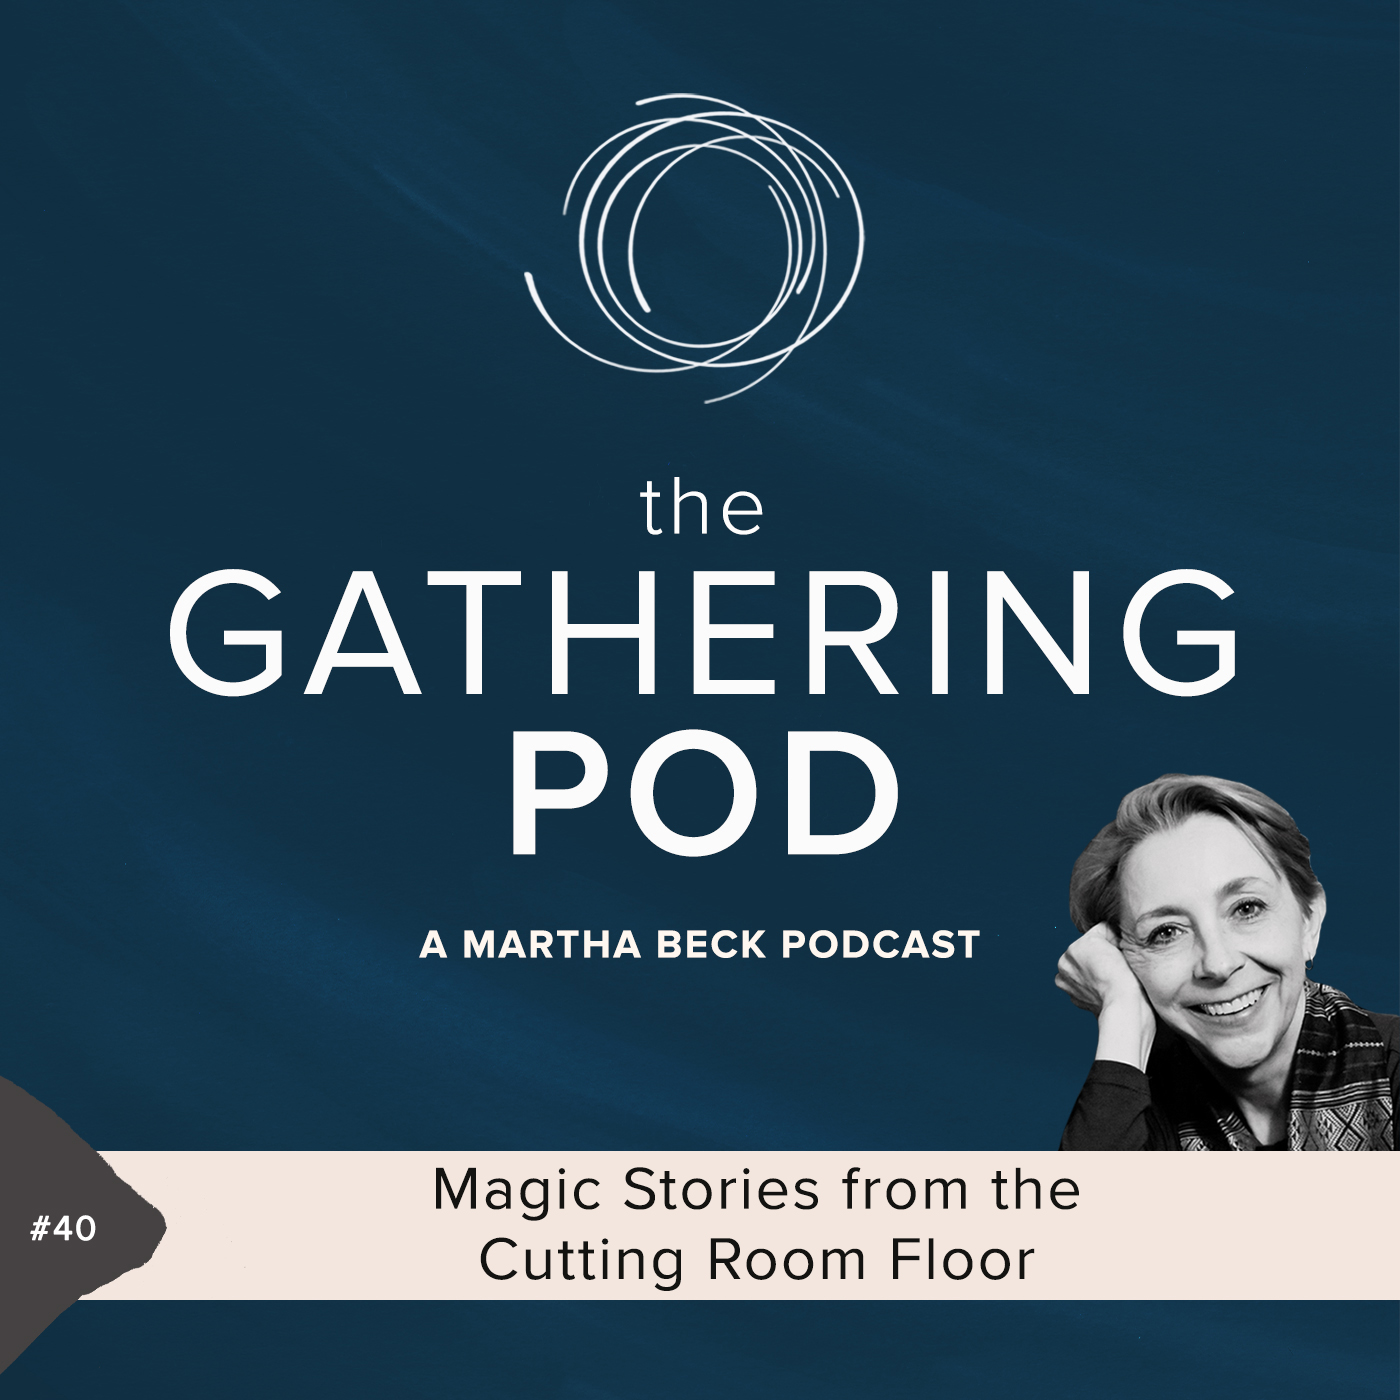 Image for The Gathering Pod A Martha Beck Podcast Episode #40 Magic Stories from the Cutting Room Floor